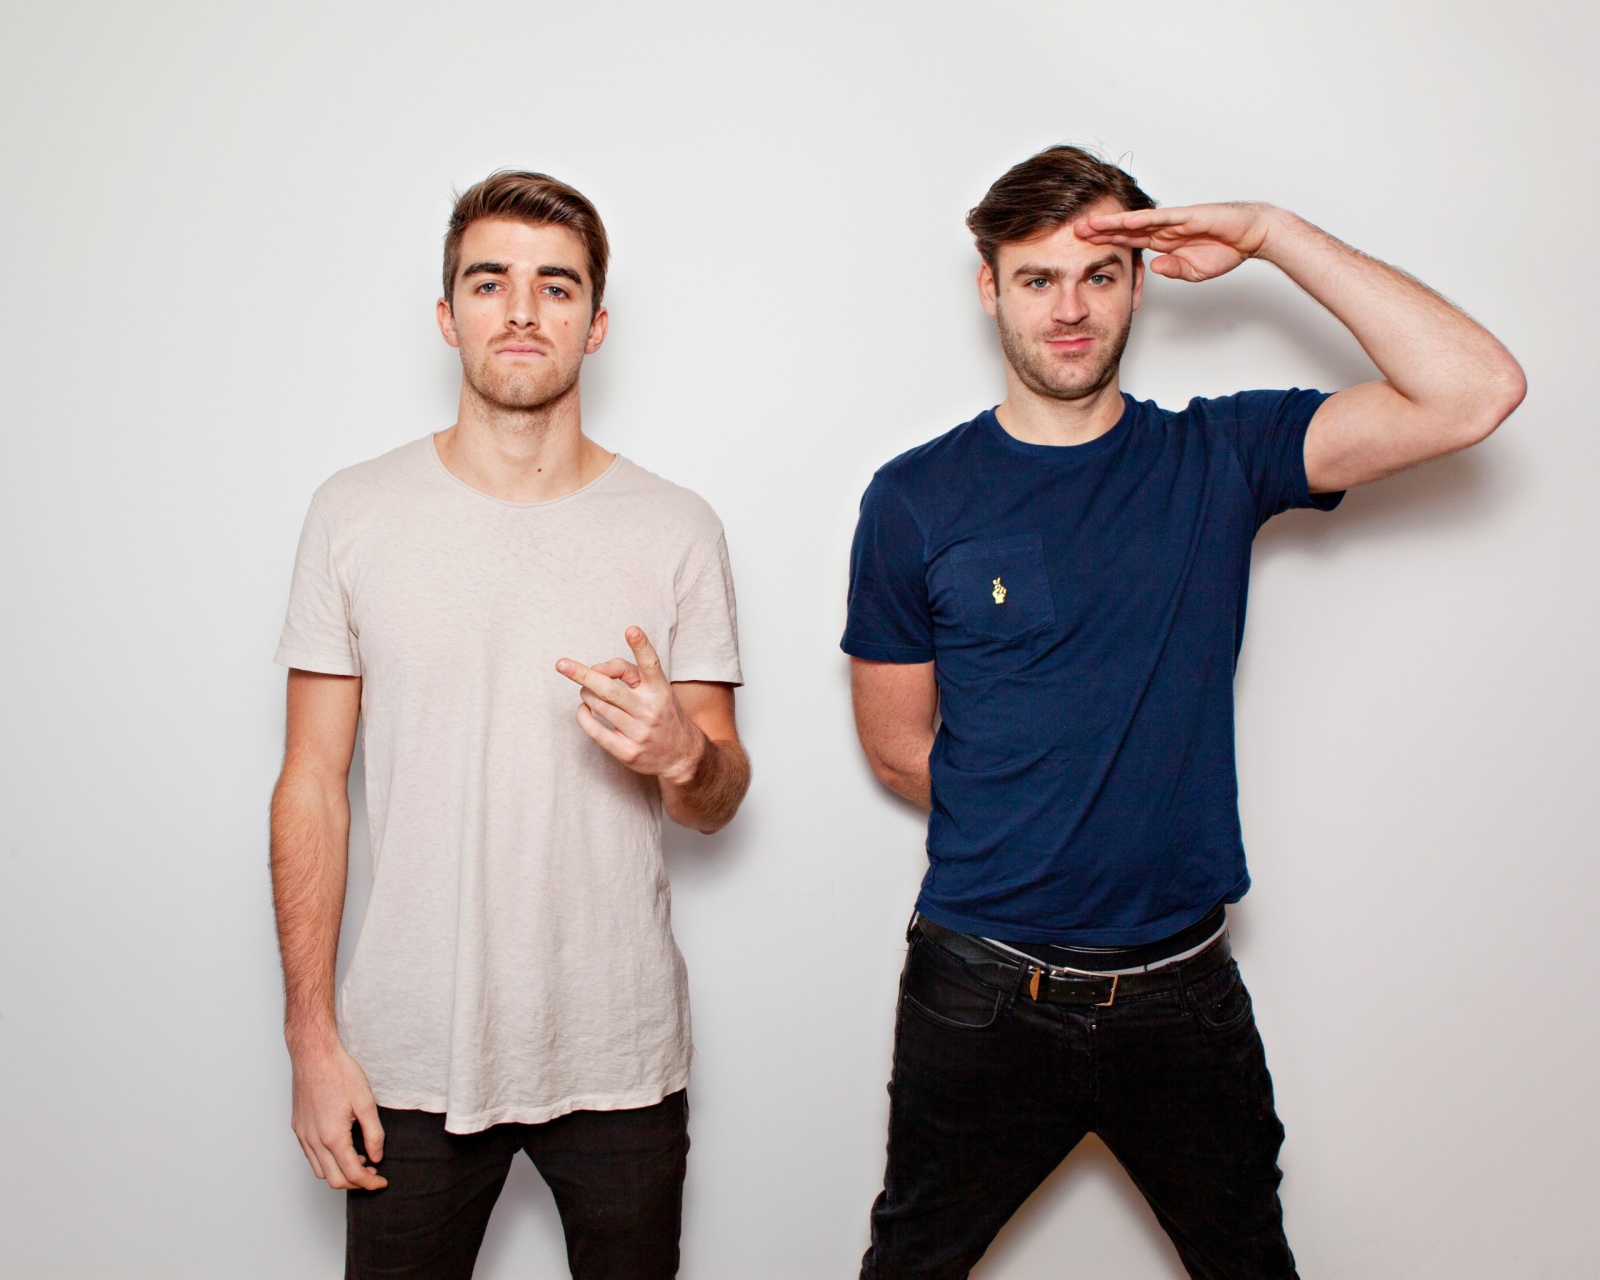 The Chainsmokers with Andrew Taggart and Alex Pall wallpaper 1600x1280